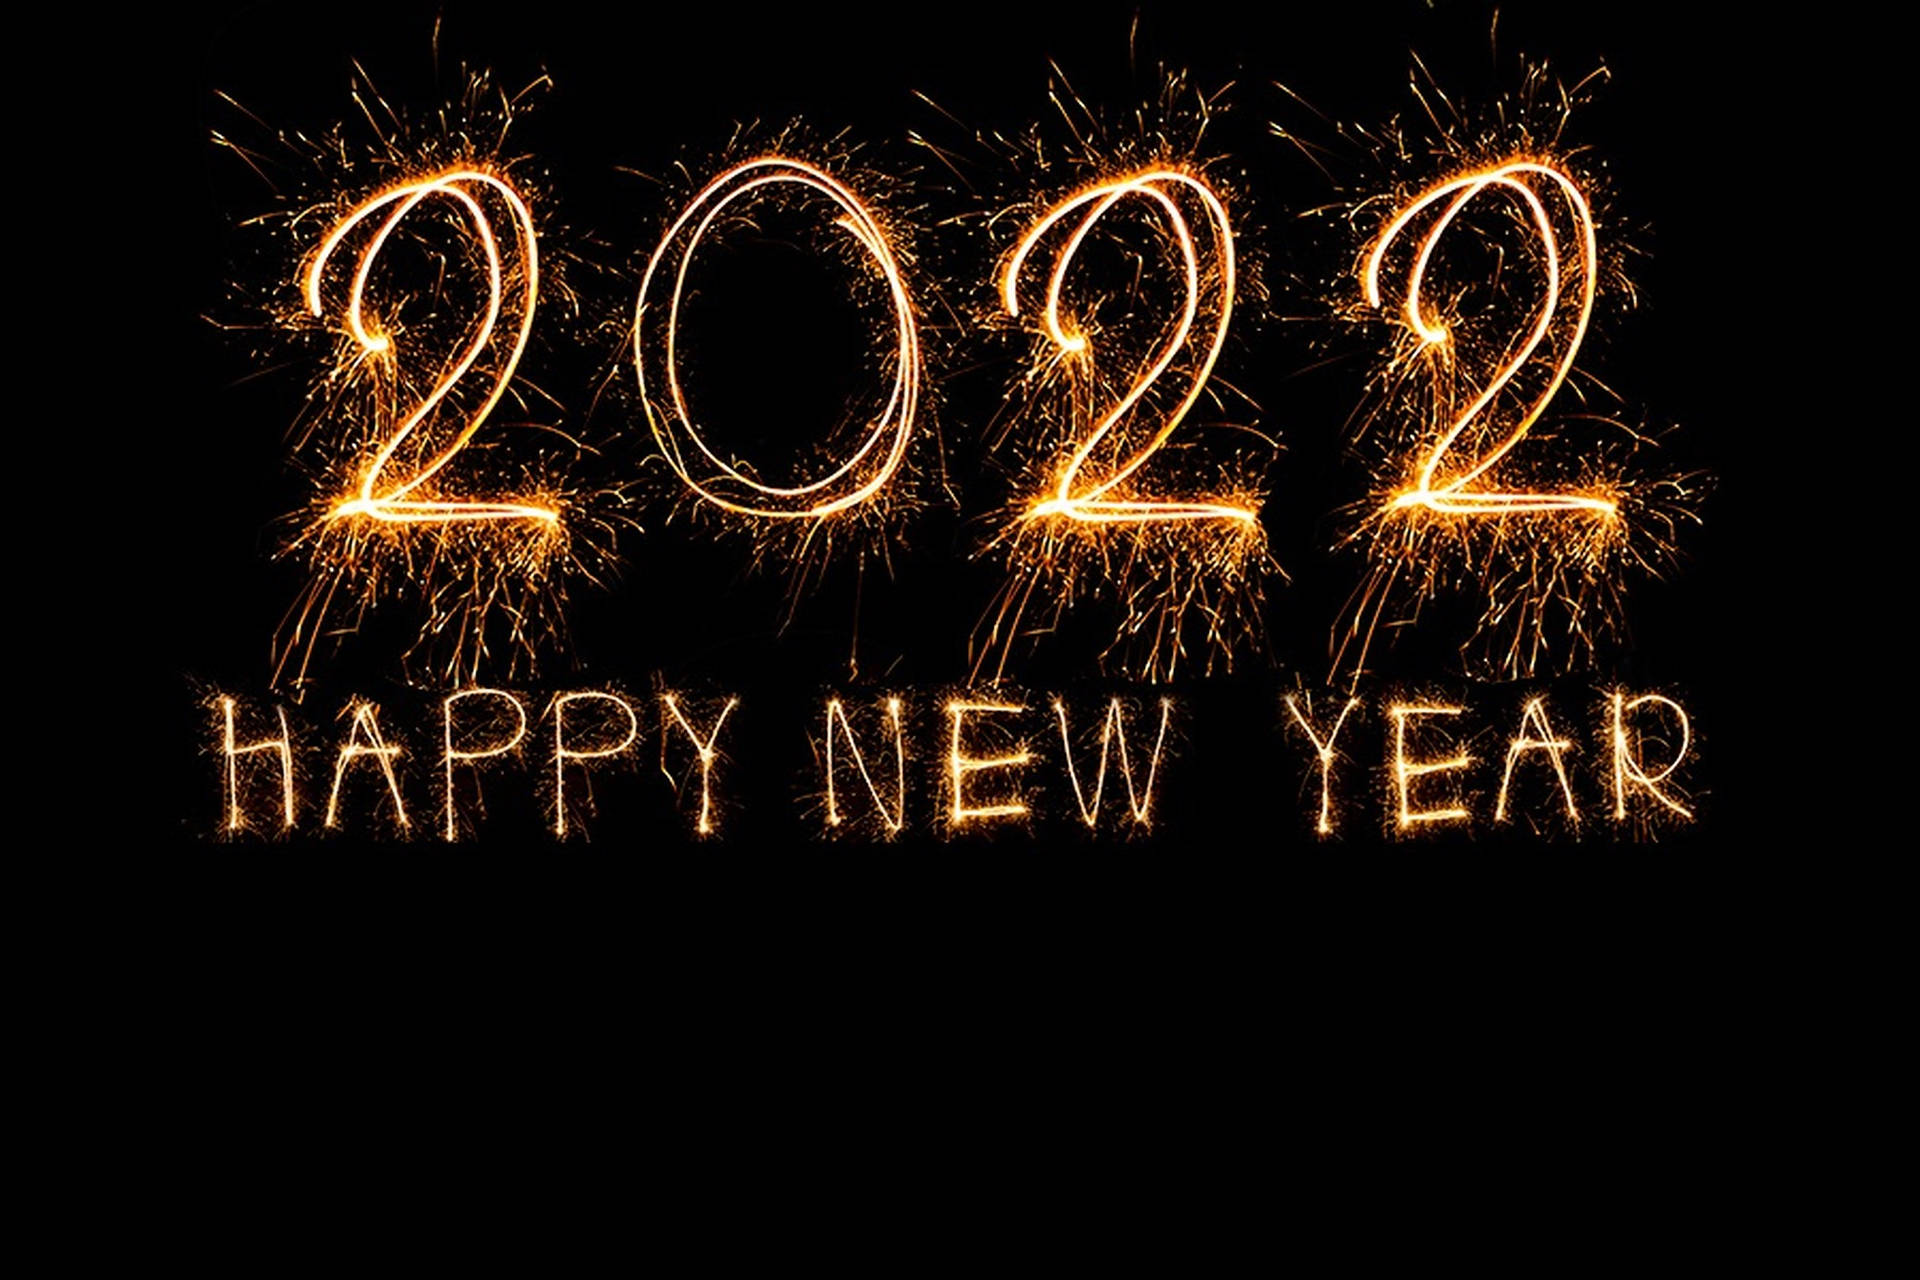 Happy New Year 2022 Sparklers Background